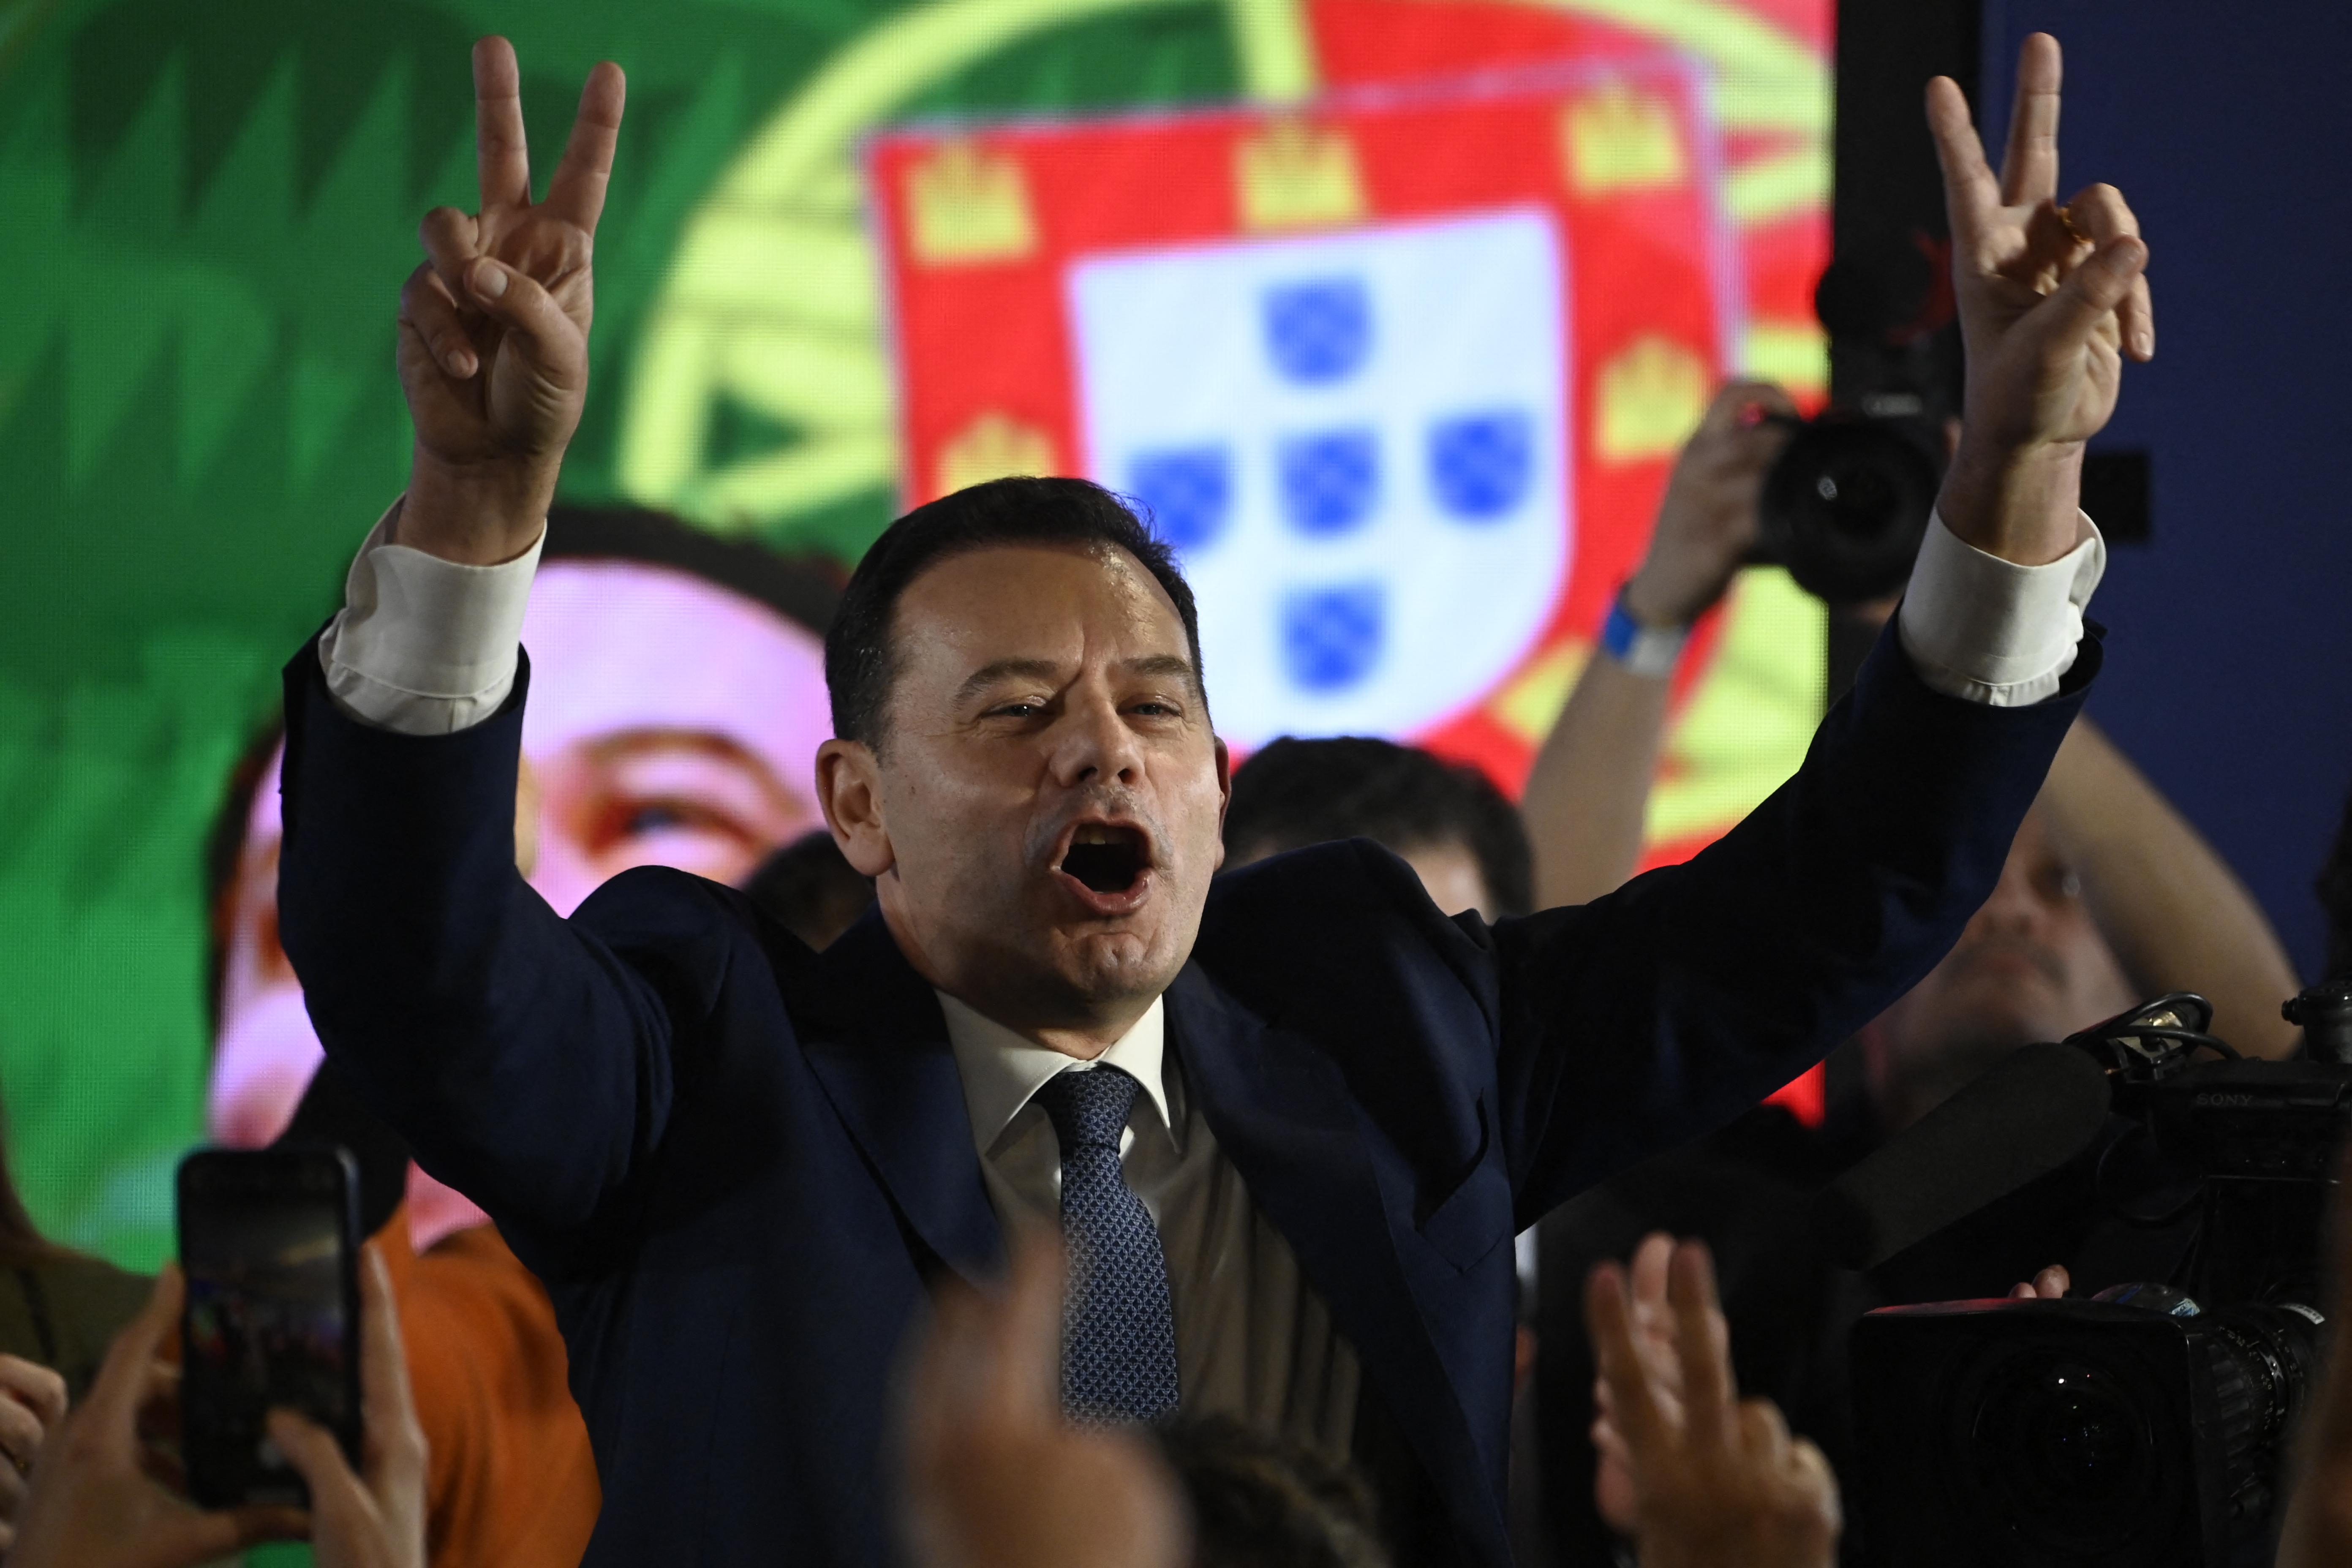 Chega extremists triumph in Portugal elections with narrow victory for centre-right.